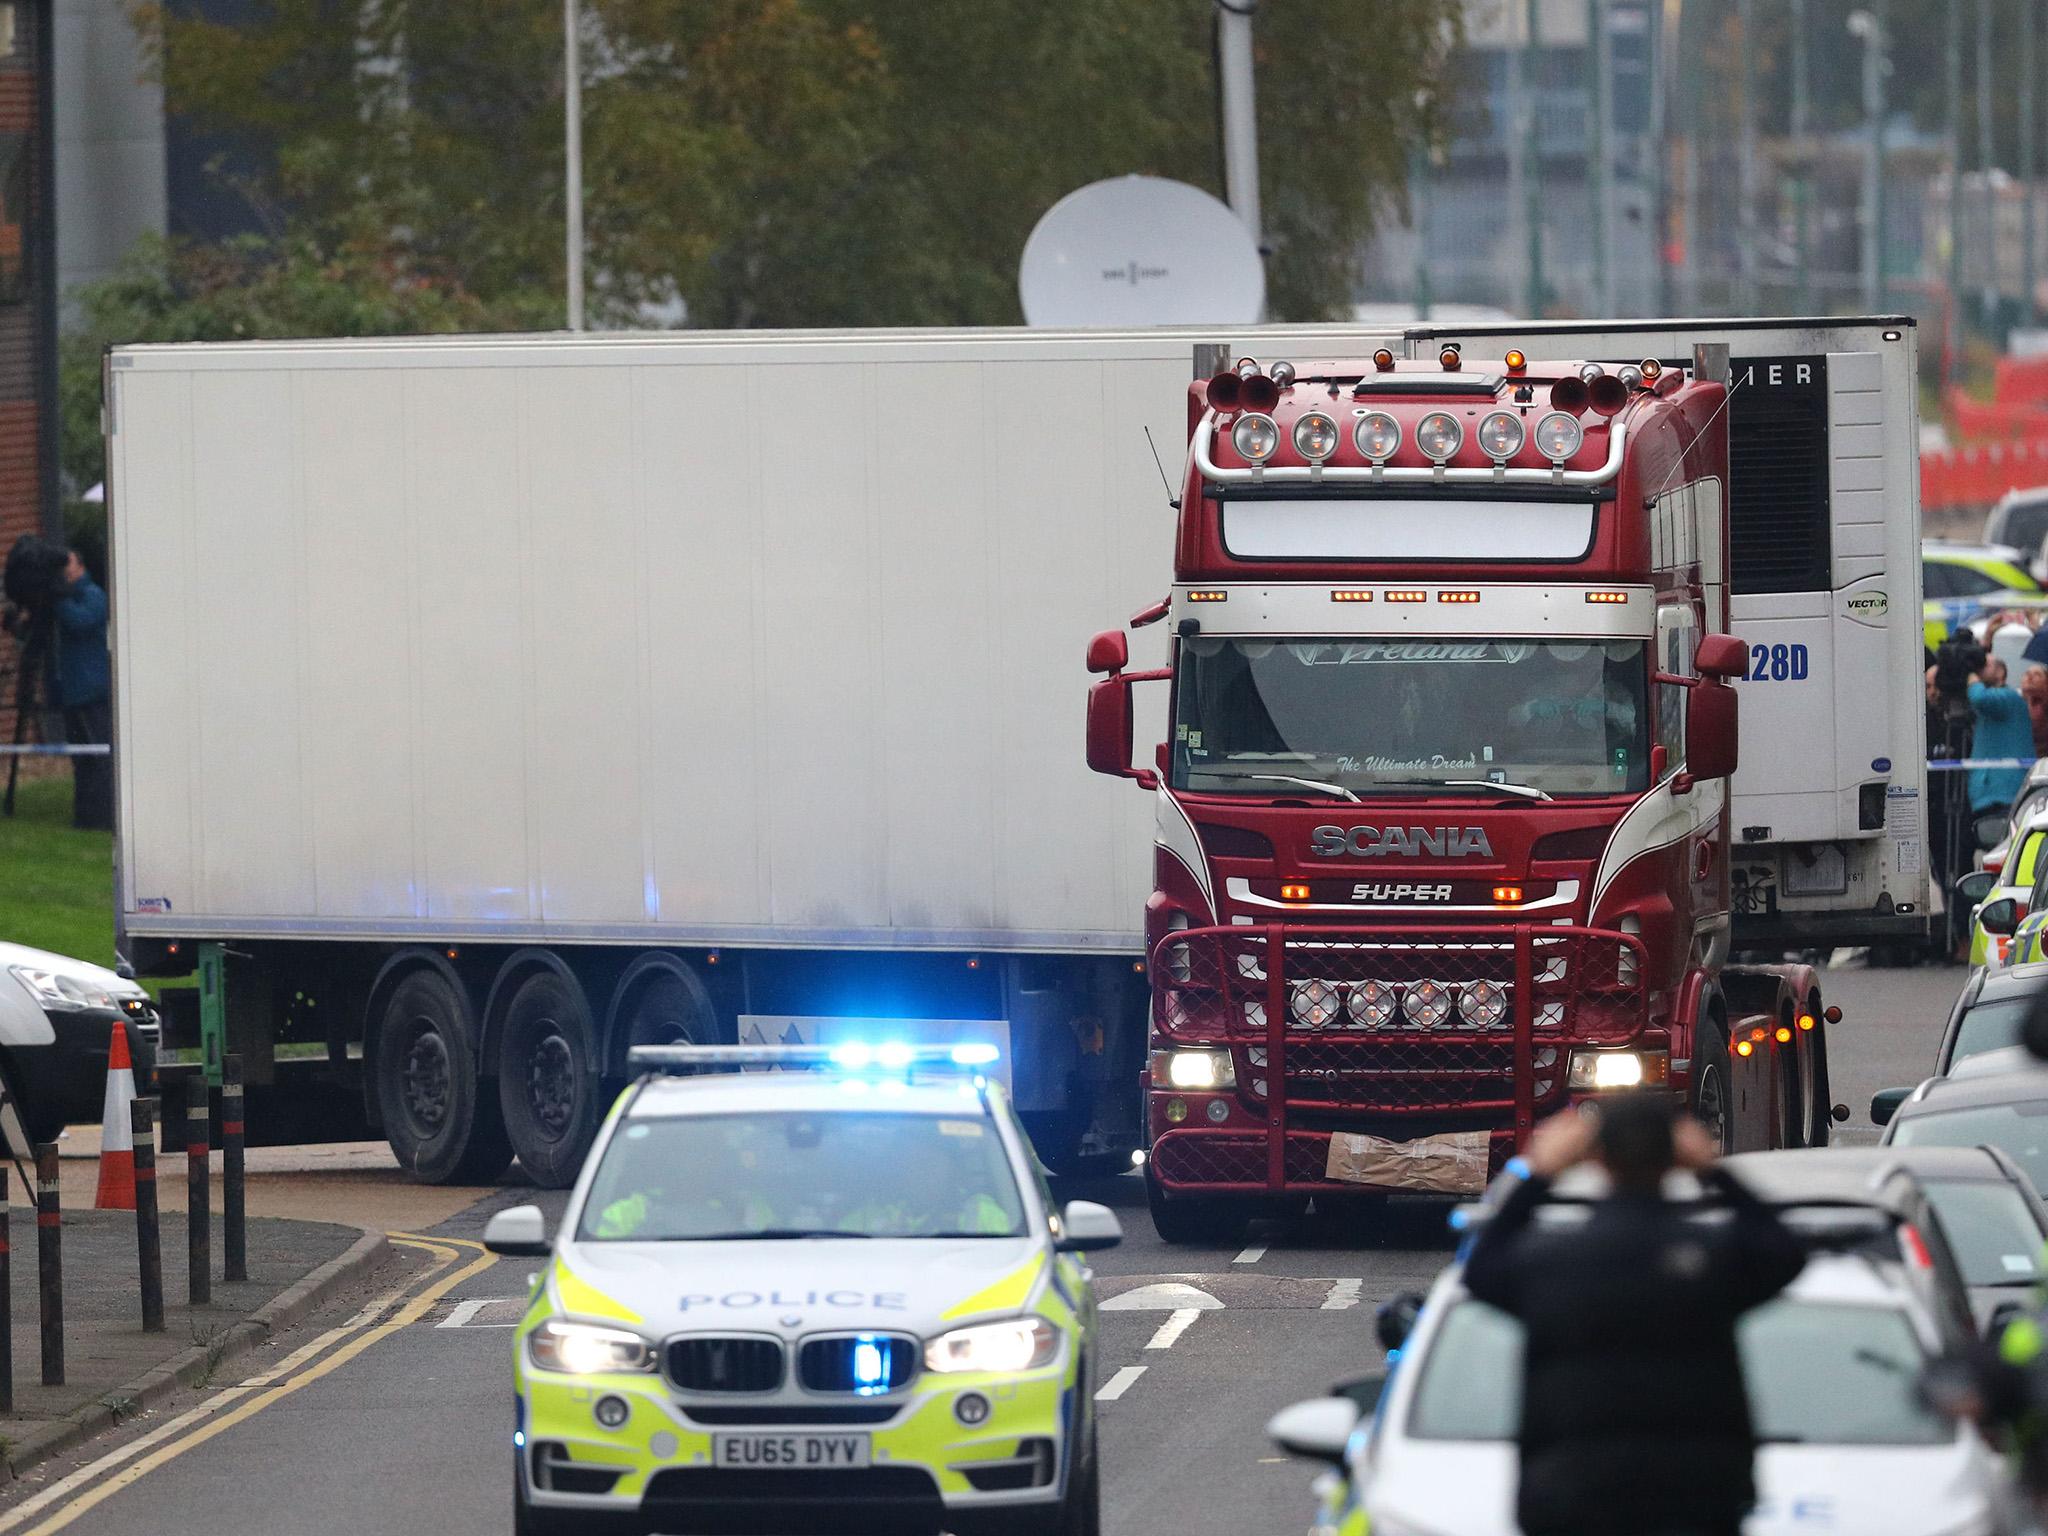 The container lorry where 39 people were found dead inside leaves Waterglade Industrial Park in Grays, Essex, heading towards Tilbury Docks under police escort